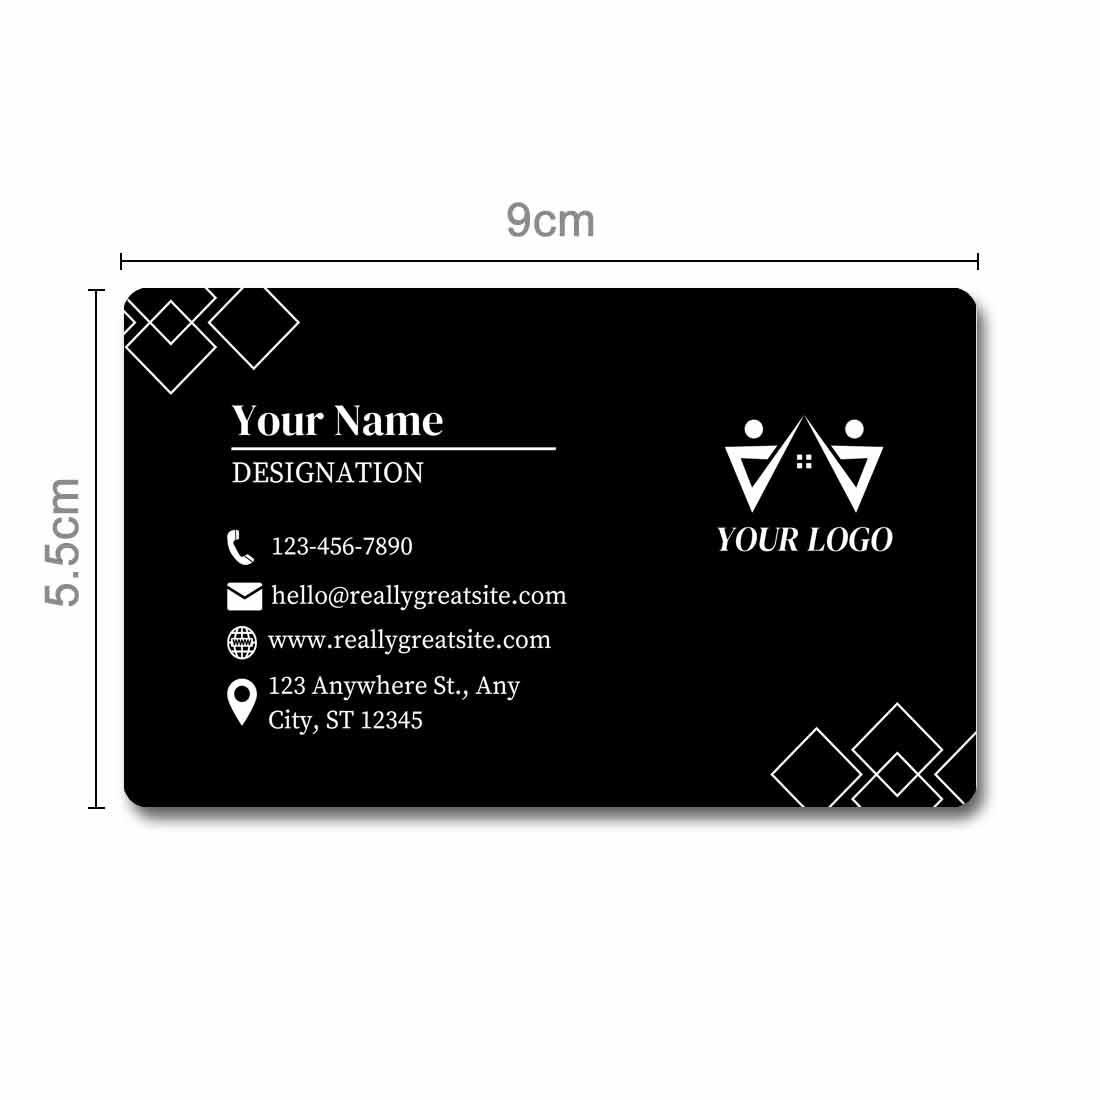 Customized Metal NFC Visiting Card Engraving - Your Name ( For Android Phones Only)